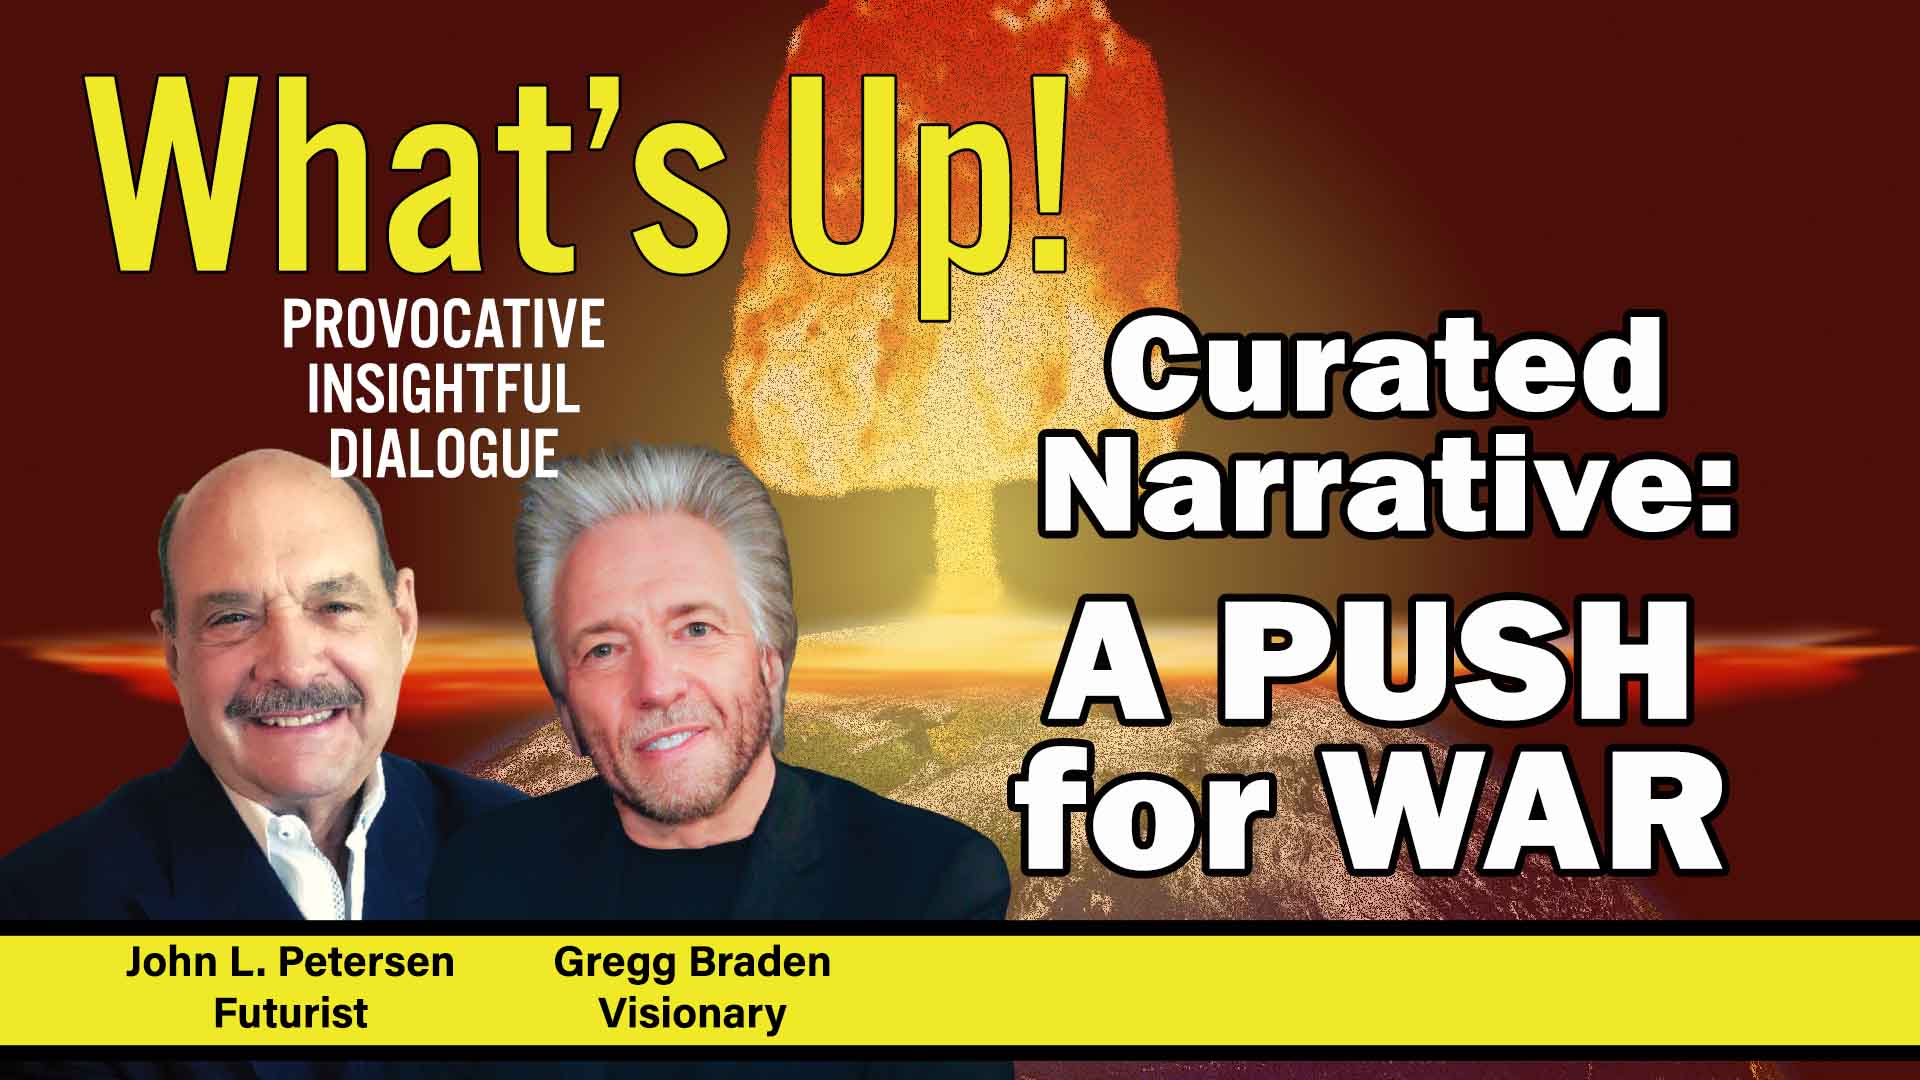 What's Up! with Gregg Braden, John Petersen, Curated Narrative: A Push for War